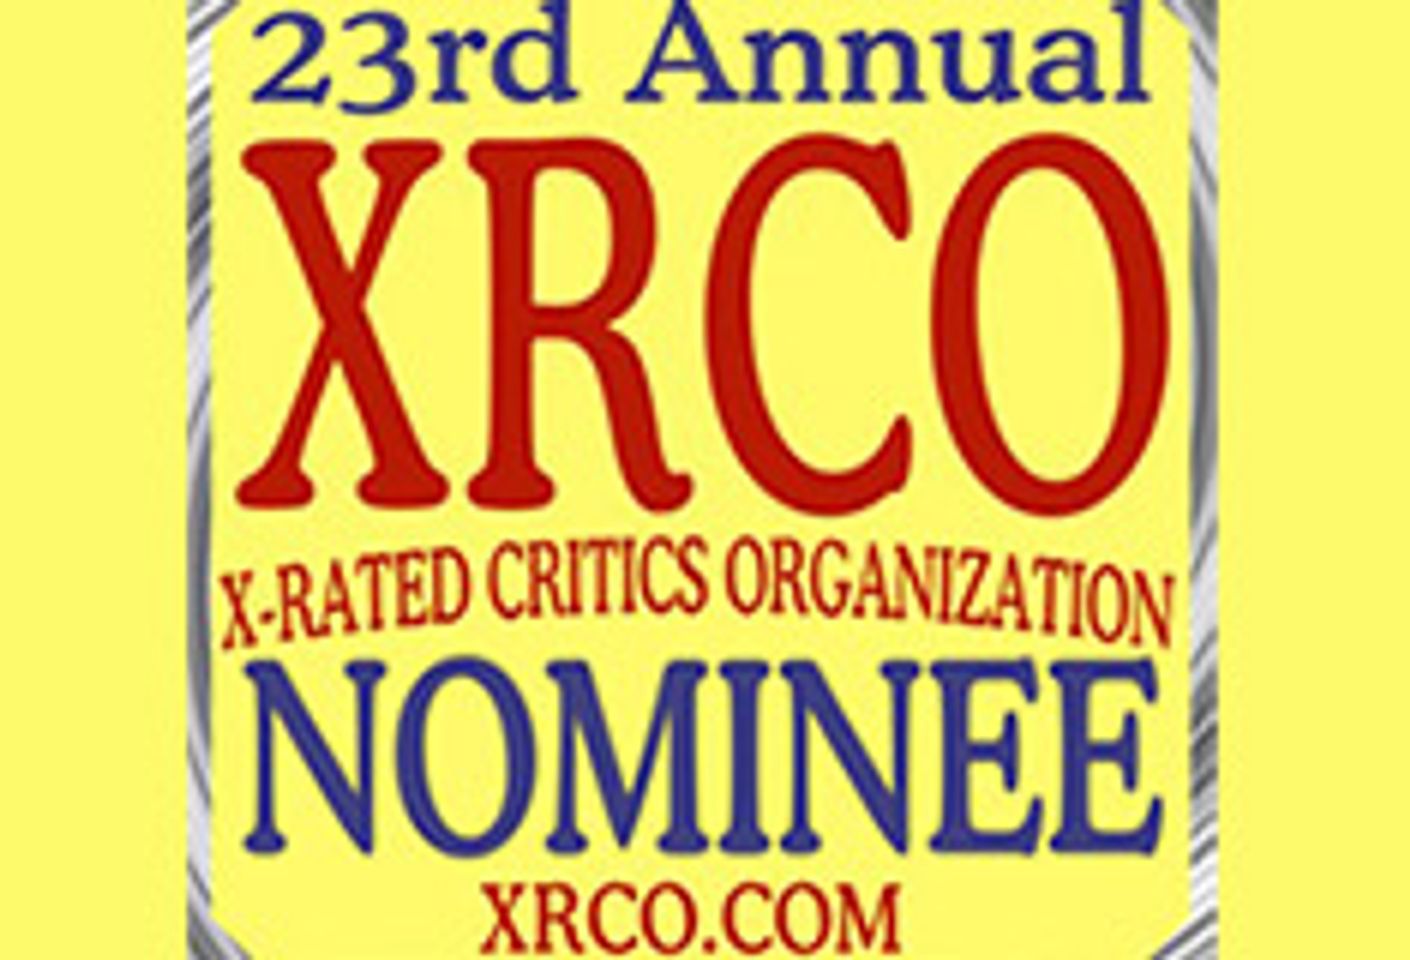 XRCO 2006 Nominations Announced